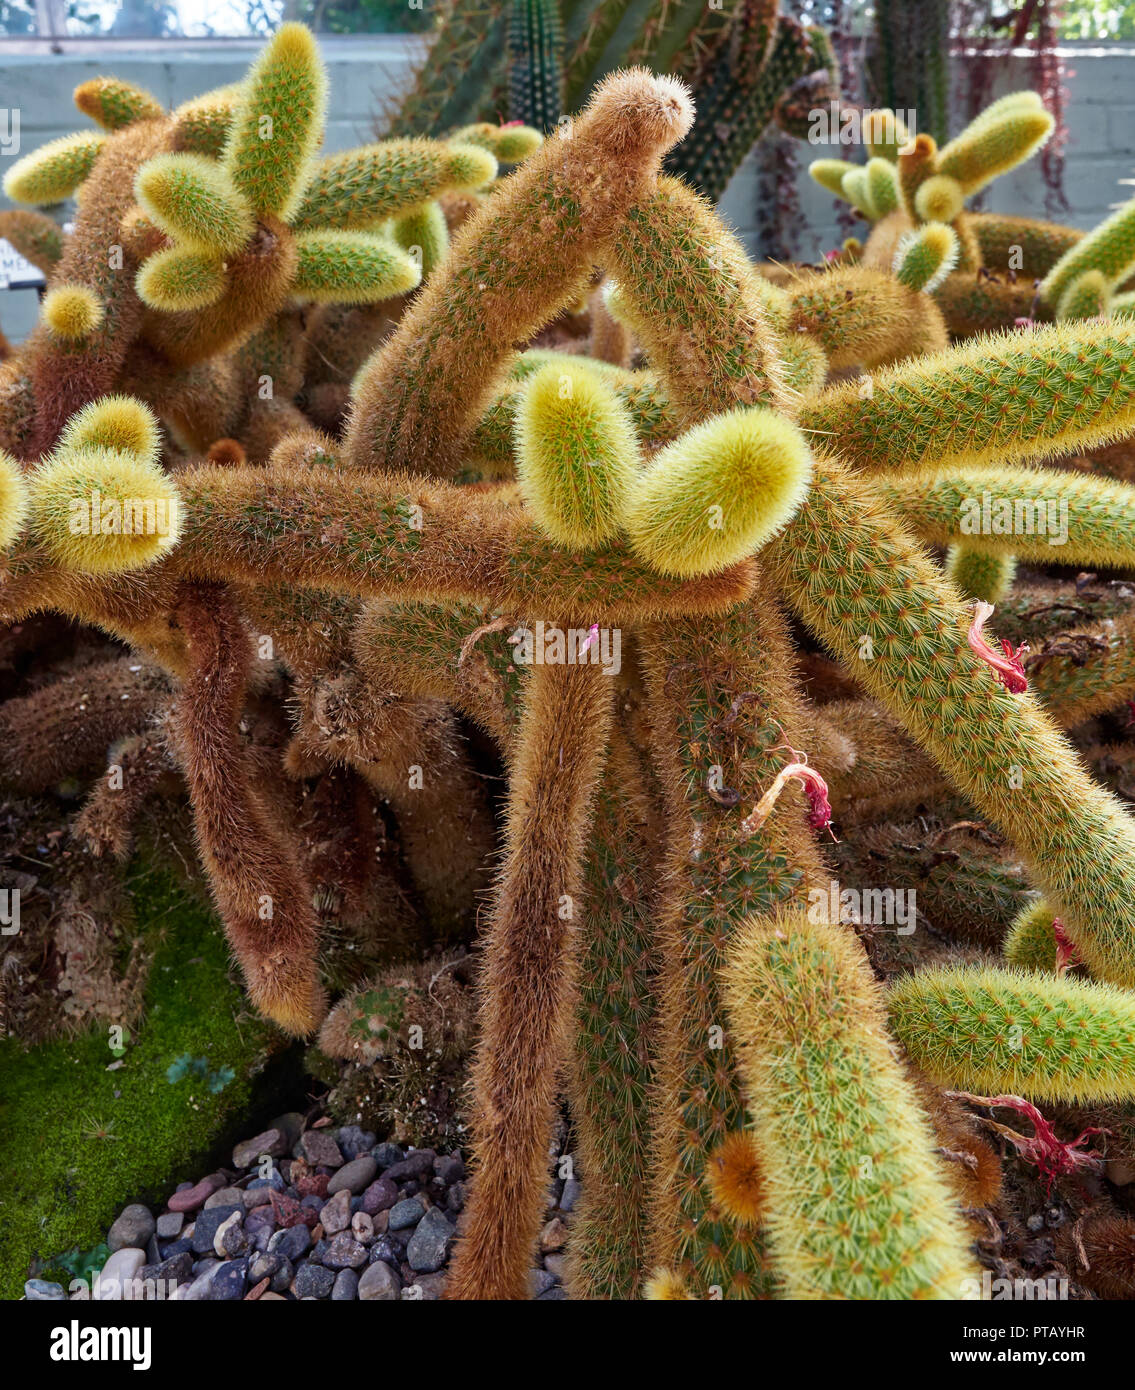 A Cleistocactus winteri Cactus plant of the Cactacea Family at the St Andrews Botanic Gardens in Fife, Scotland. Stock Photo